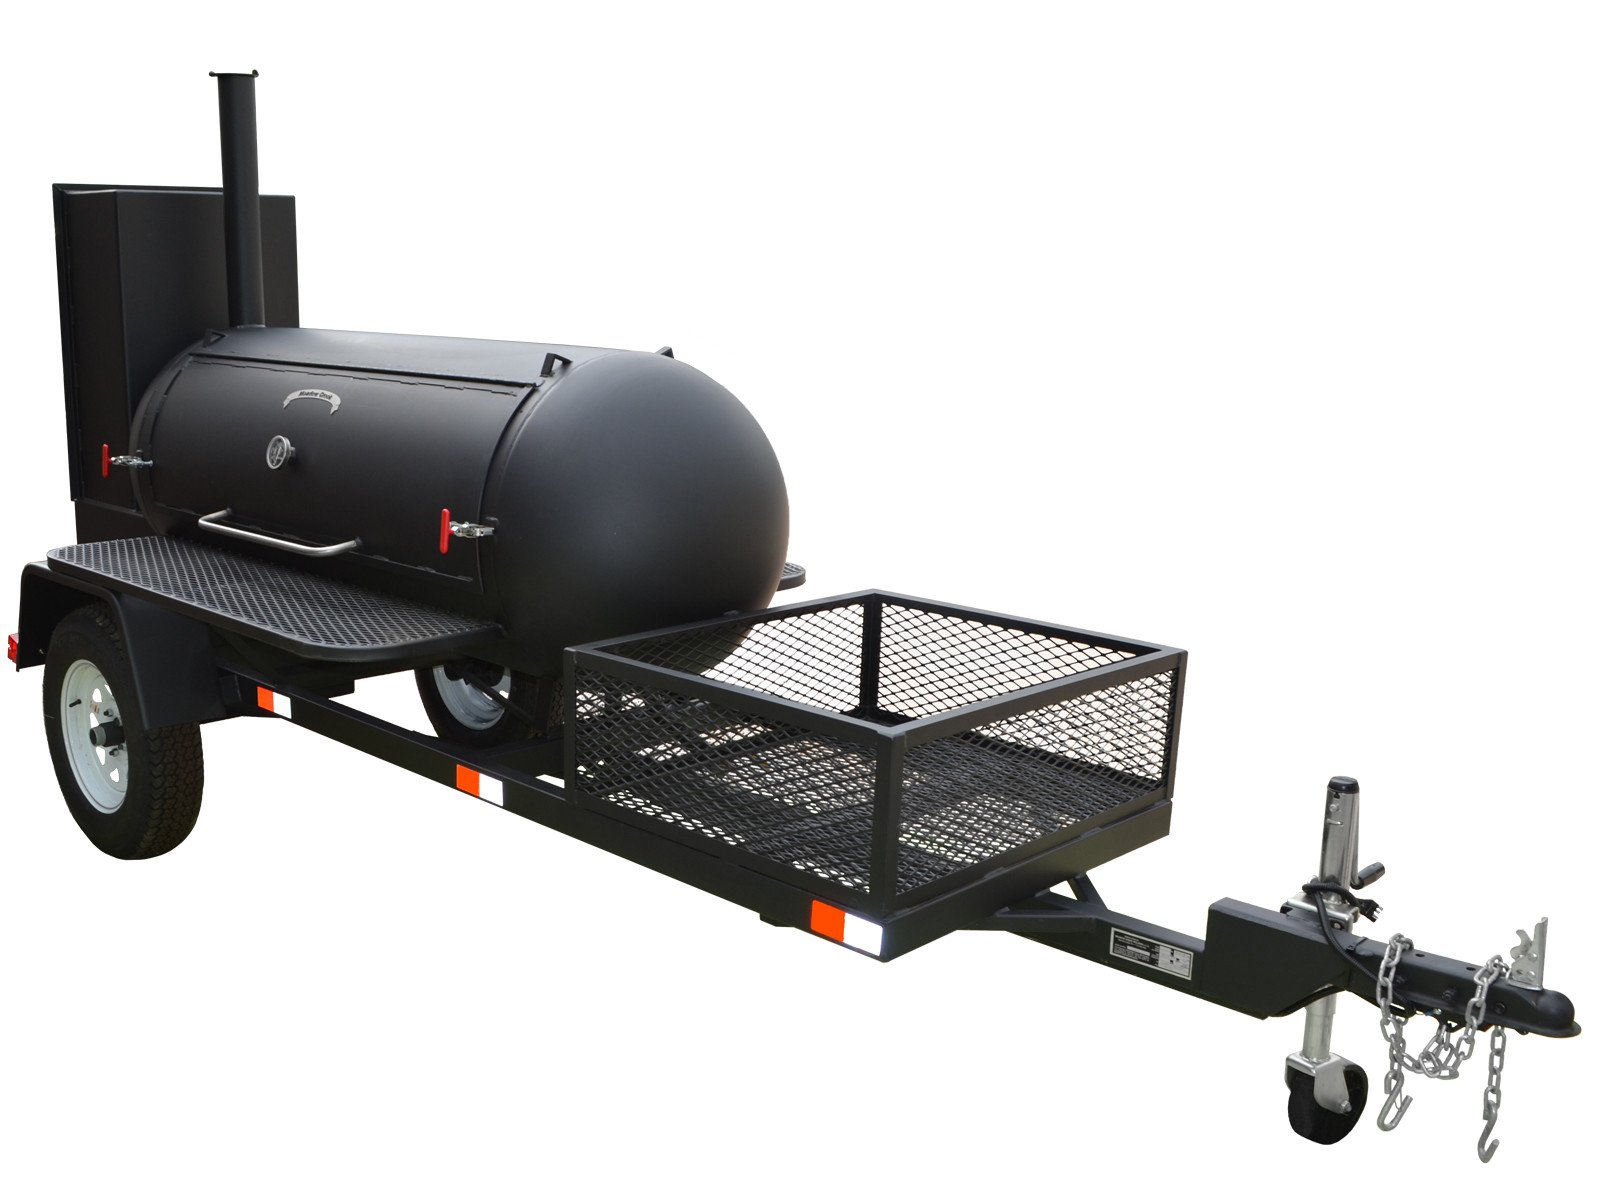 TS250 Stainless Steel Charcoal BBQ Smoker